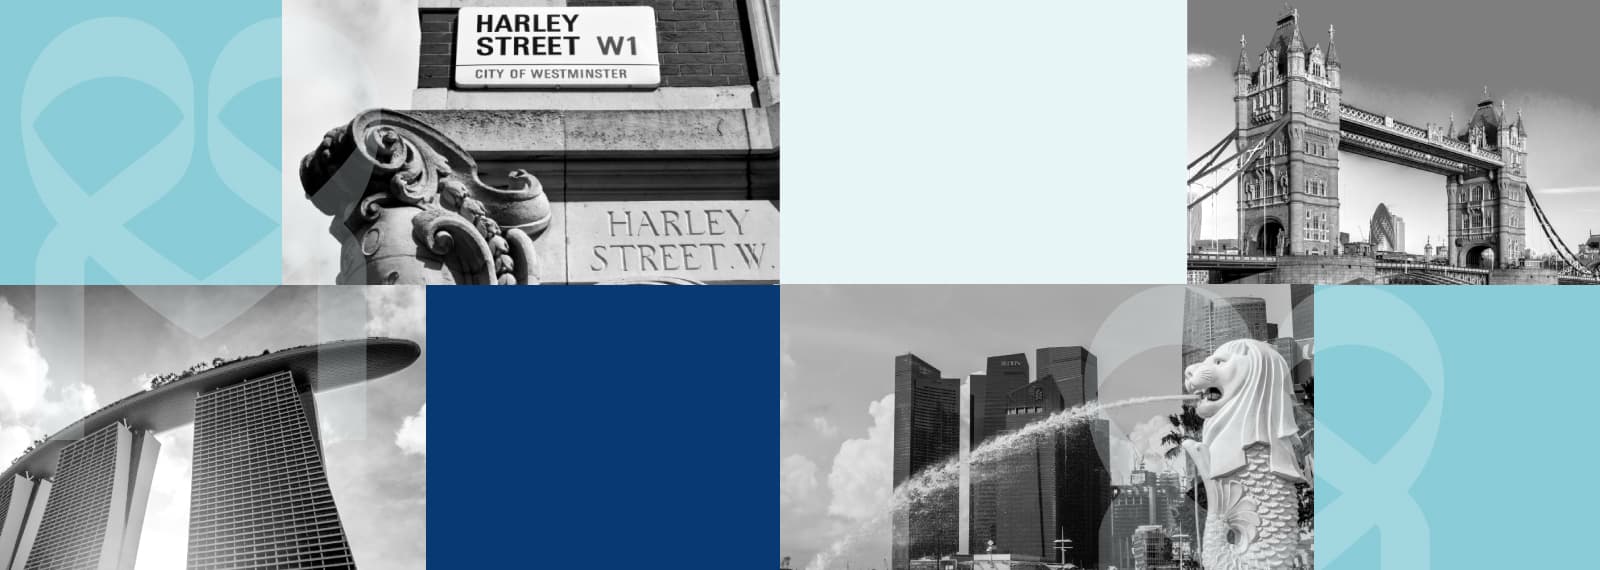 Harley Street One Stop Centre